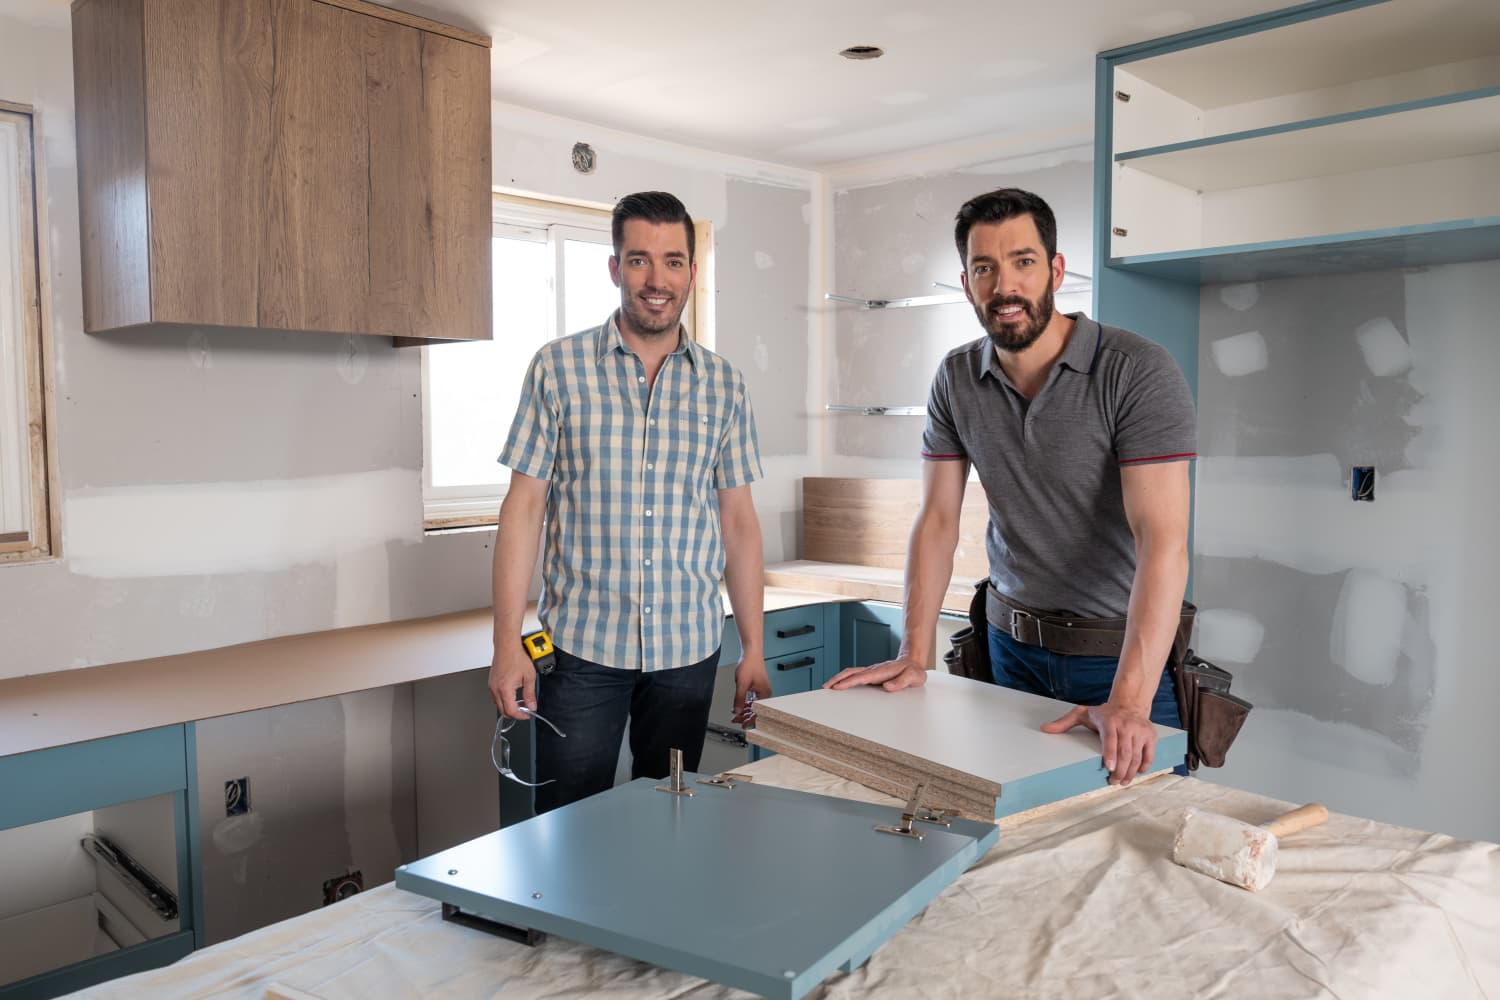 The Property Brothers Designed This Kitchen Remodel for Dogs